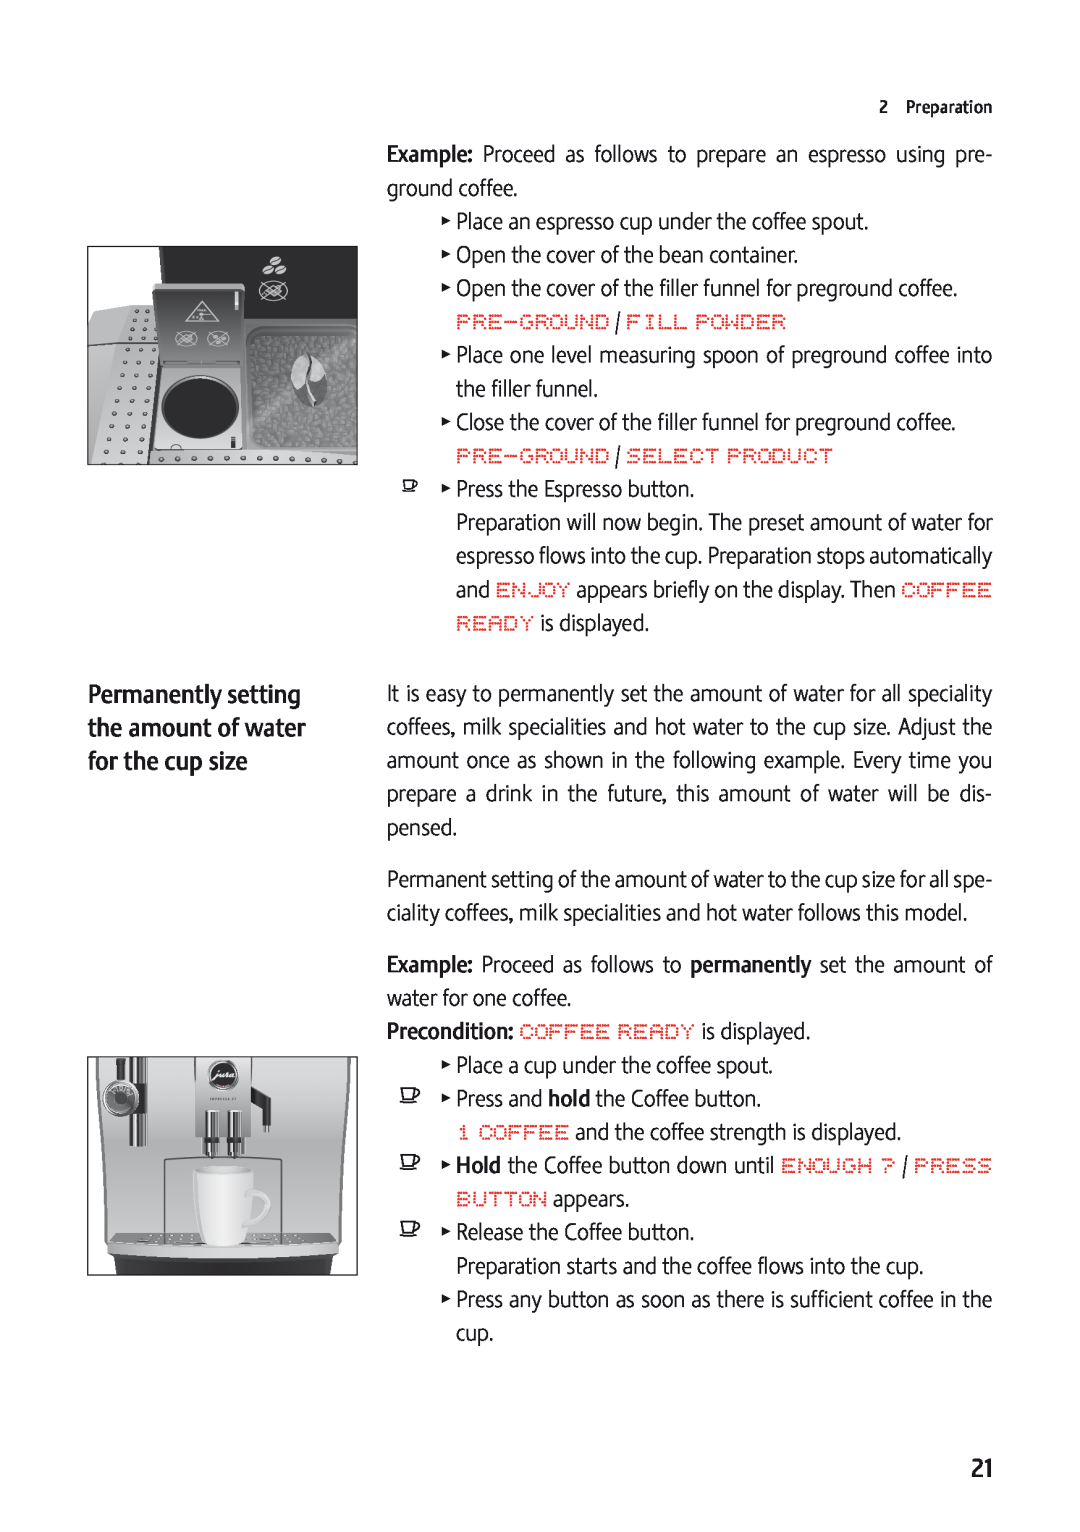 Jura Capresso JURA-13549 manual Permanently setting the amount of water for the cup size, Pre-Ground / Fill Powder 